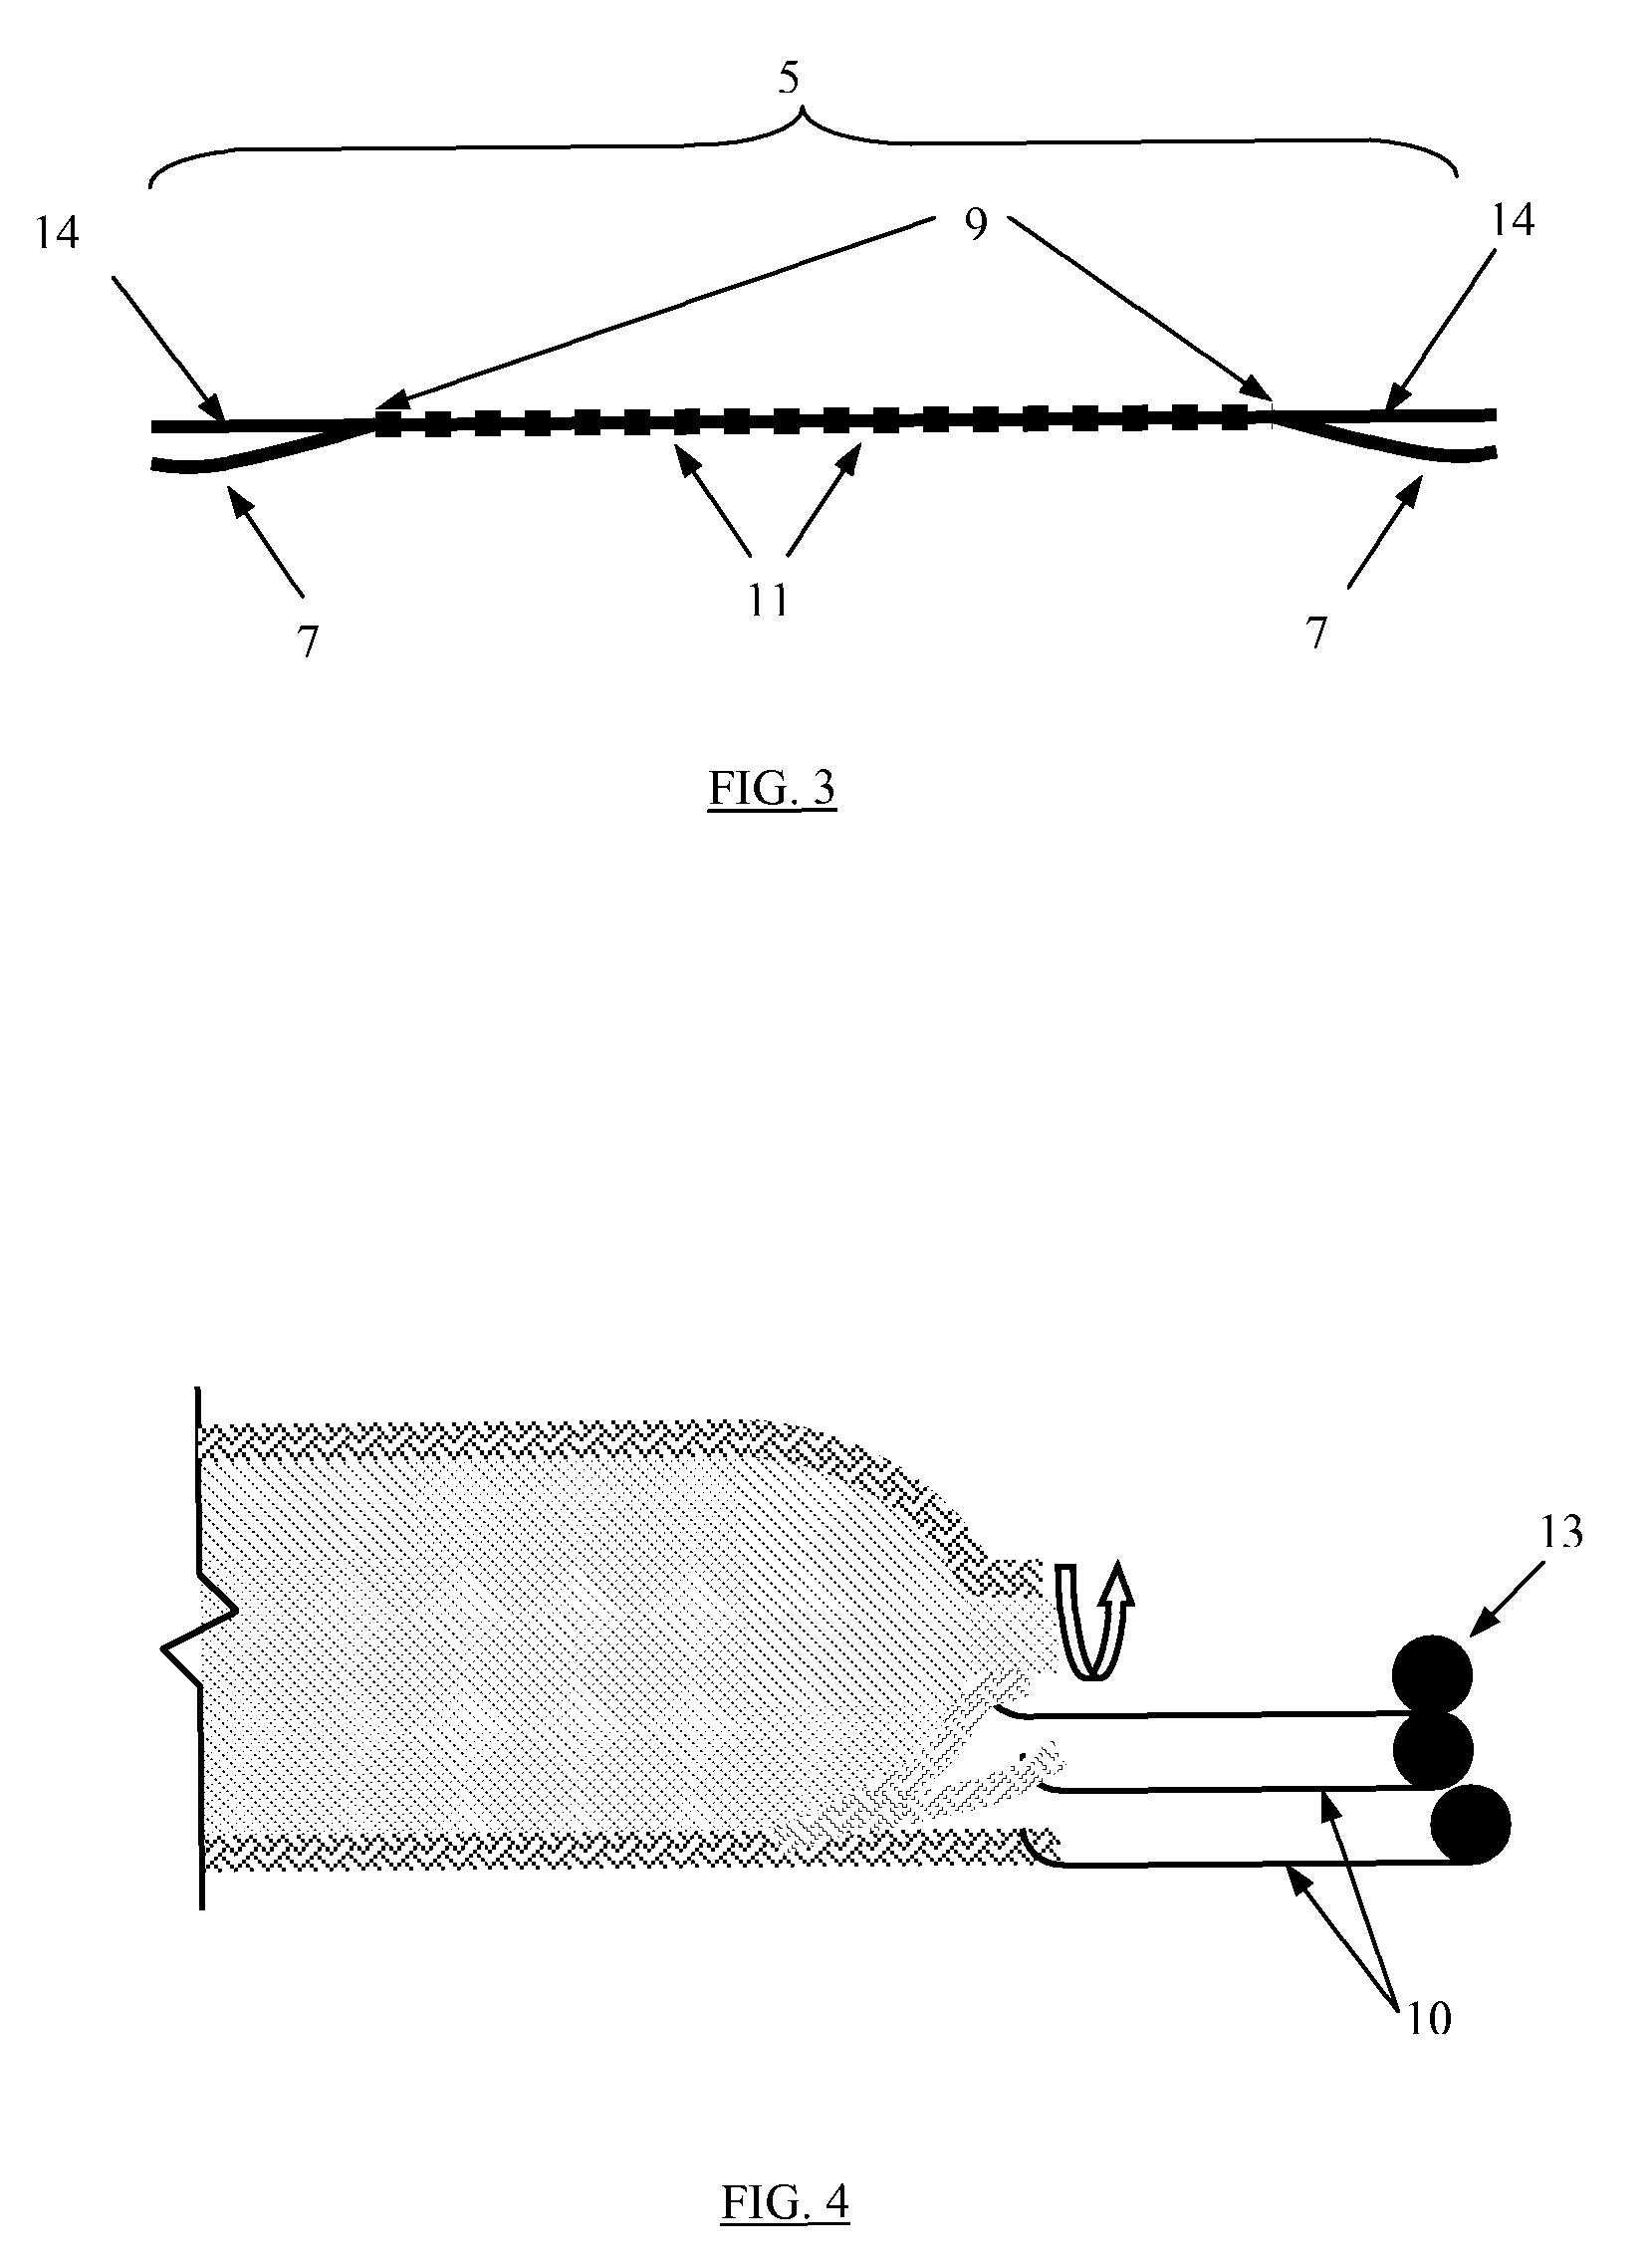 Process for the rapid fabrication of composite gas cylinders and related shapes